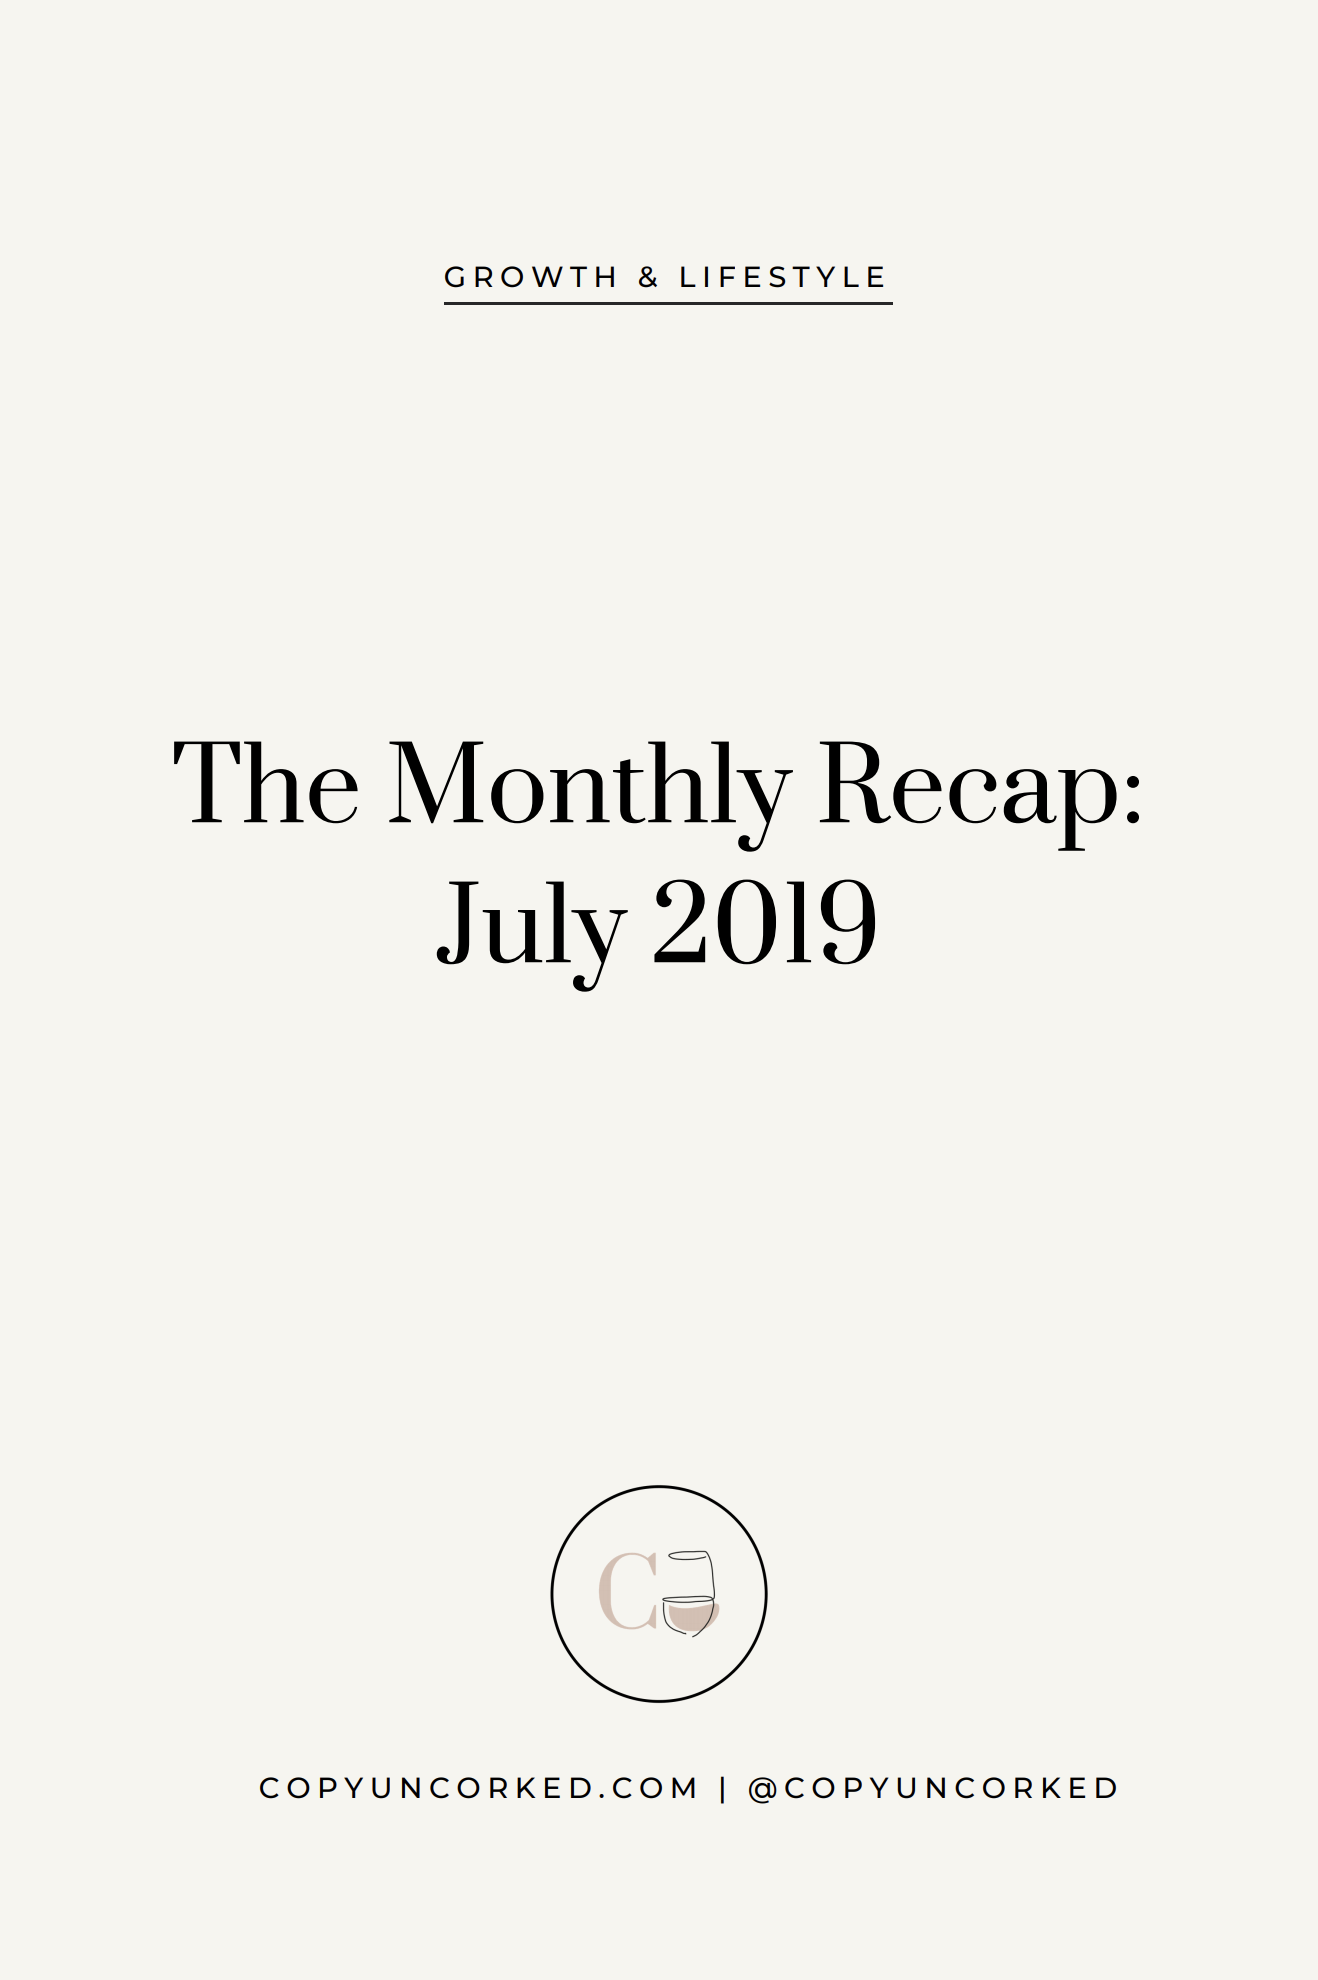 The Monthly Recap: July 2019 - Copy Uncorked - copyuncorked.com/blog